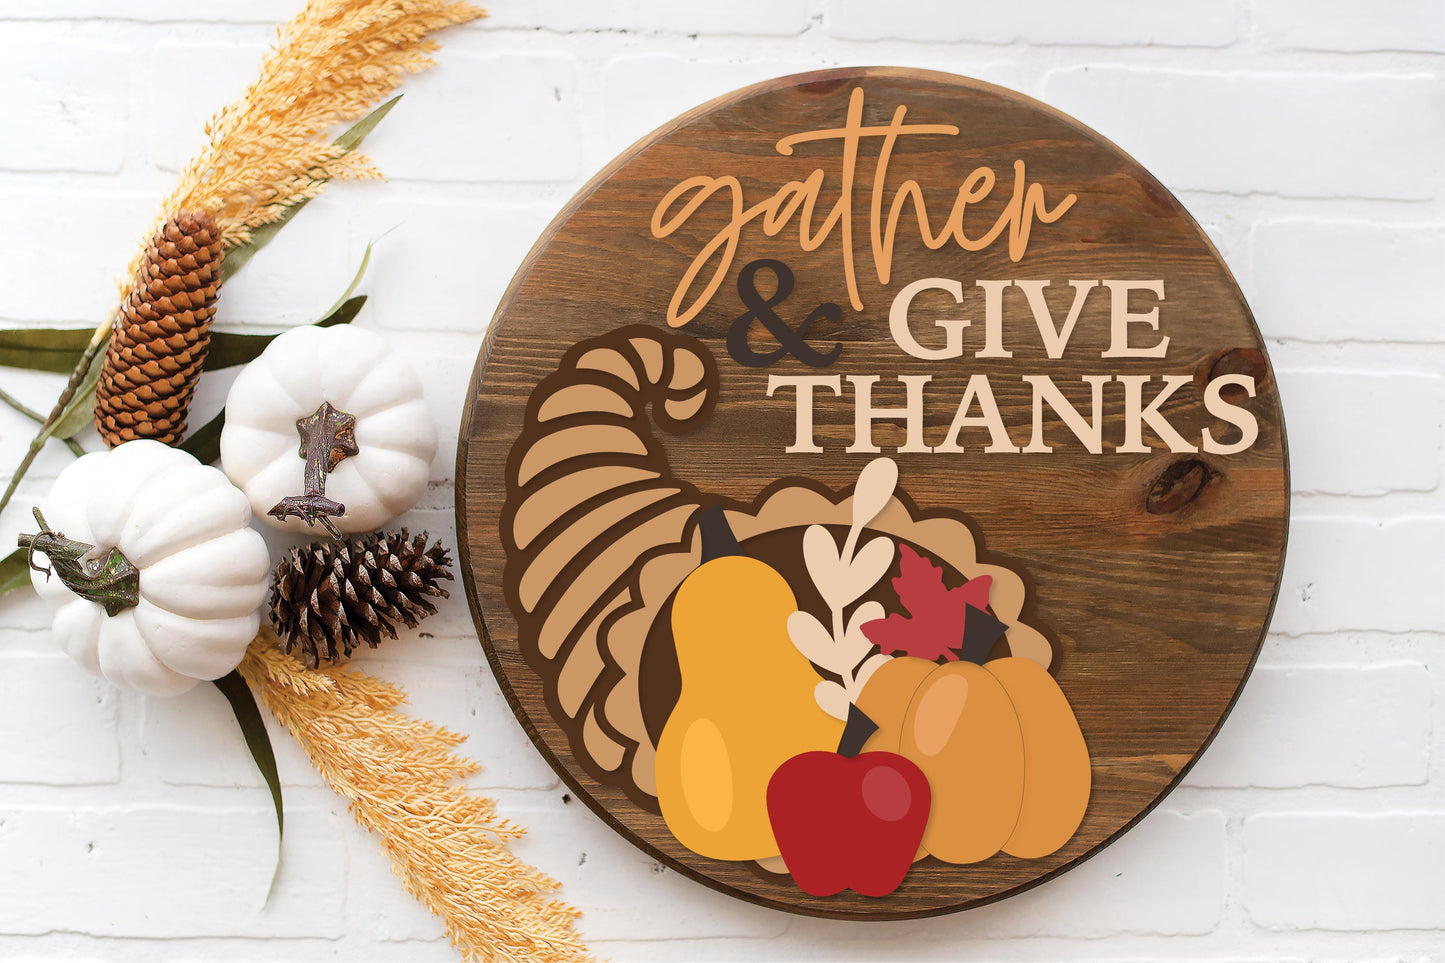 Gather and give thanks cornucopia sign